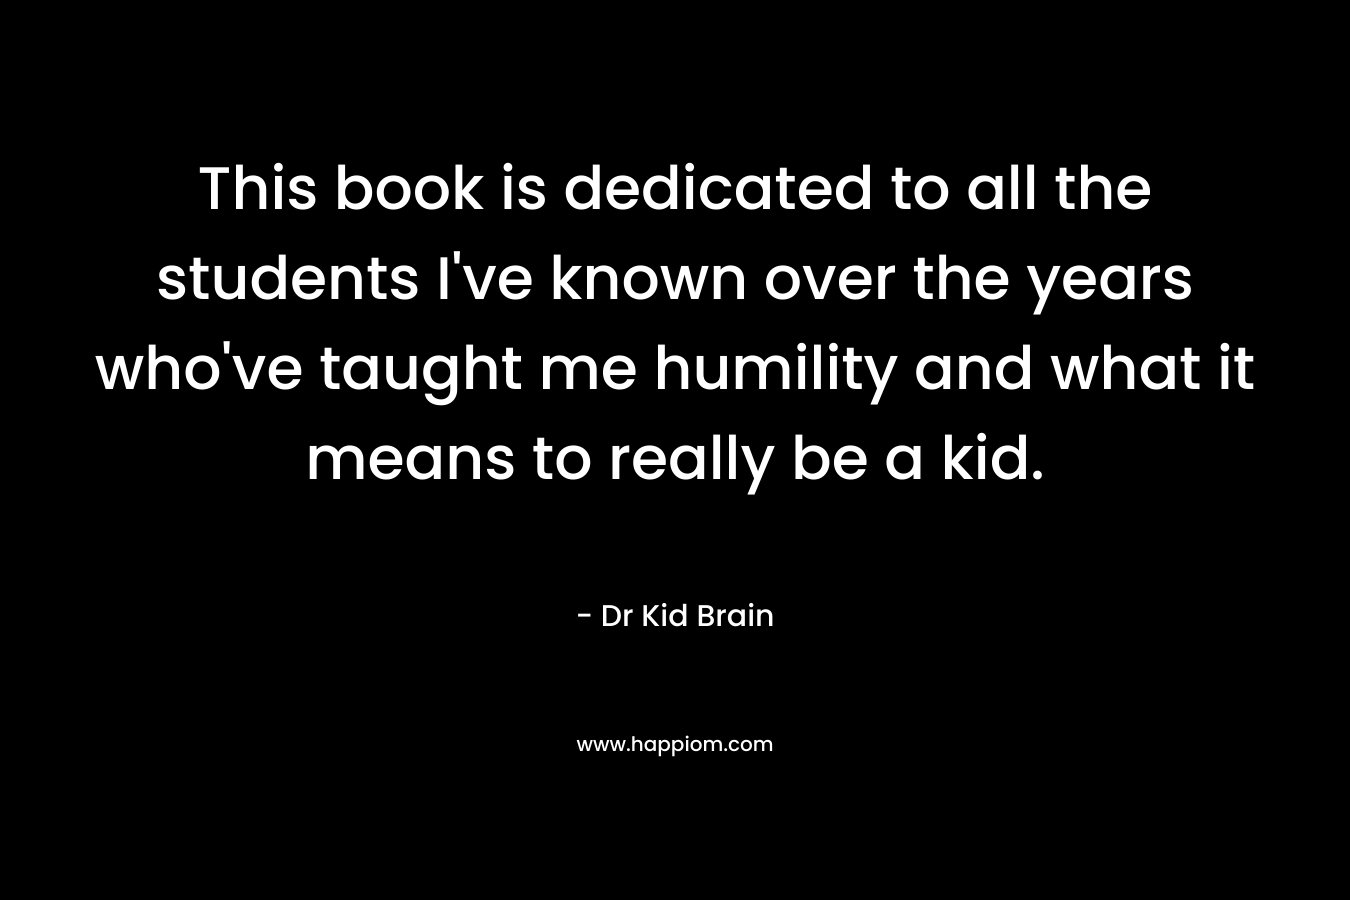 This book is dedicated to all the students I've known over the years who've taught me humility and what it means to really be a kid.